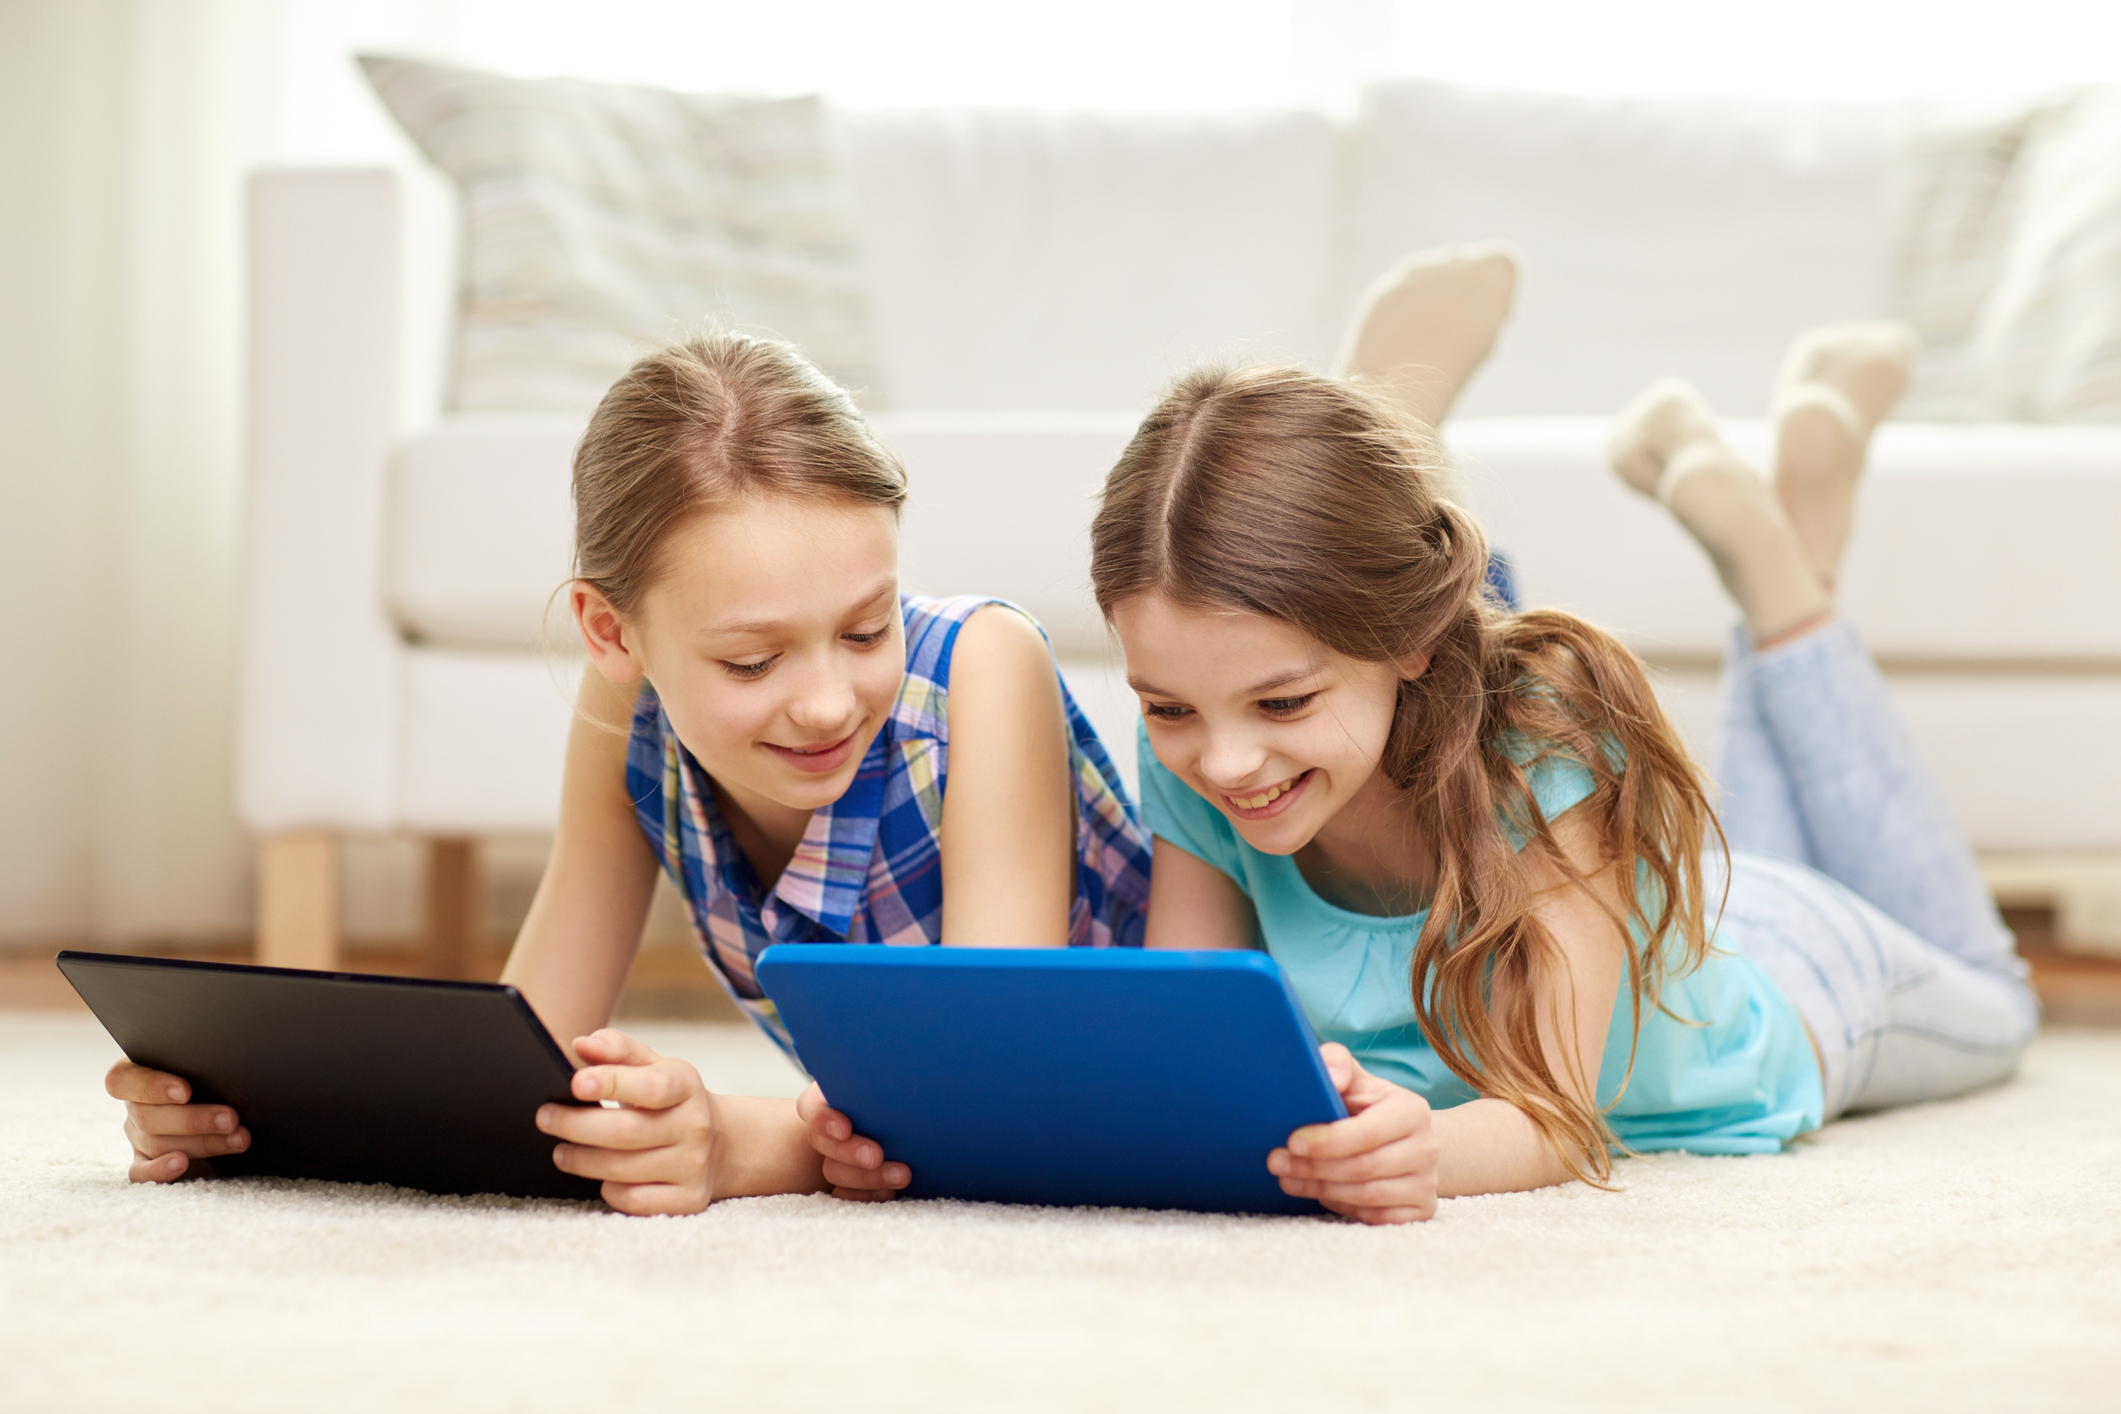 5 Foolproof Tips for Managing Your Kids’ Screen Time